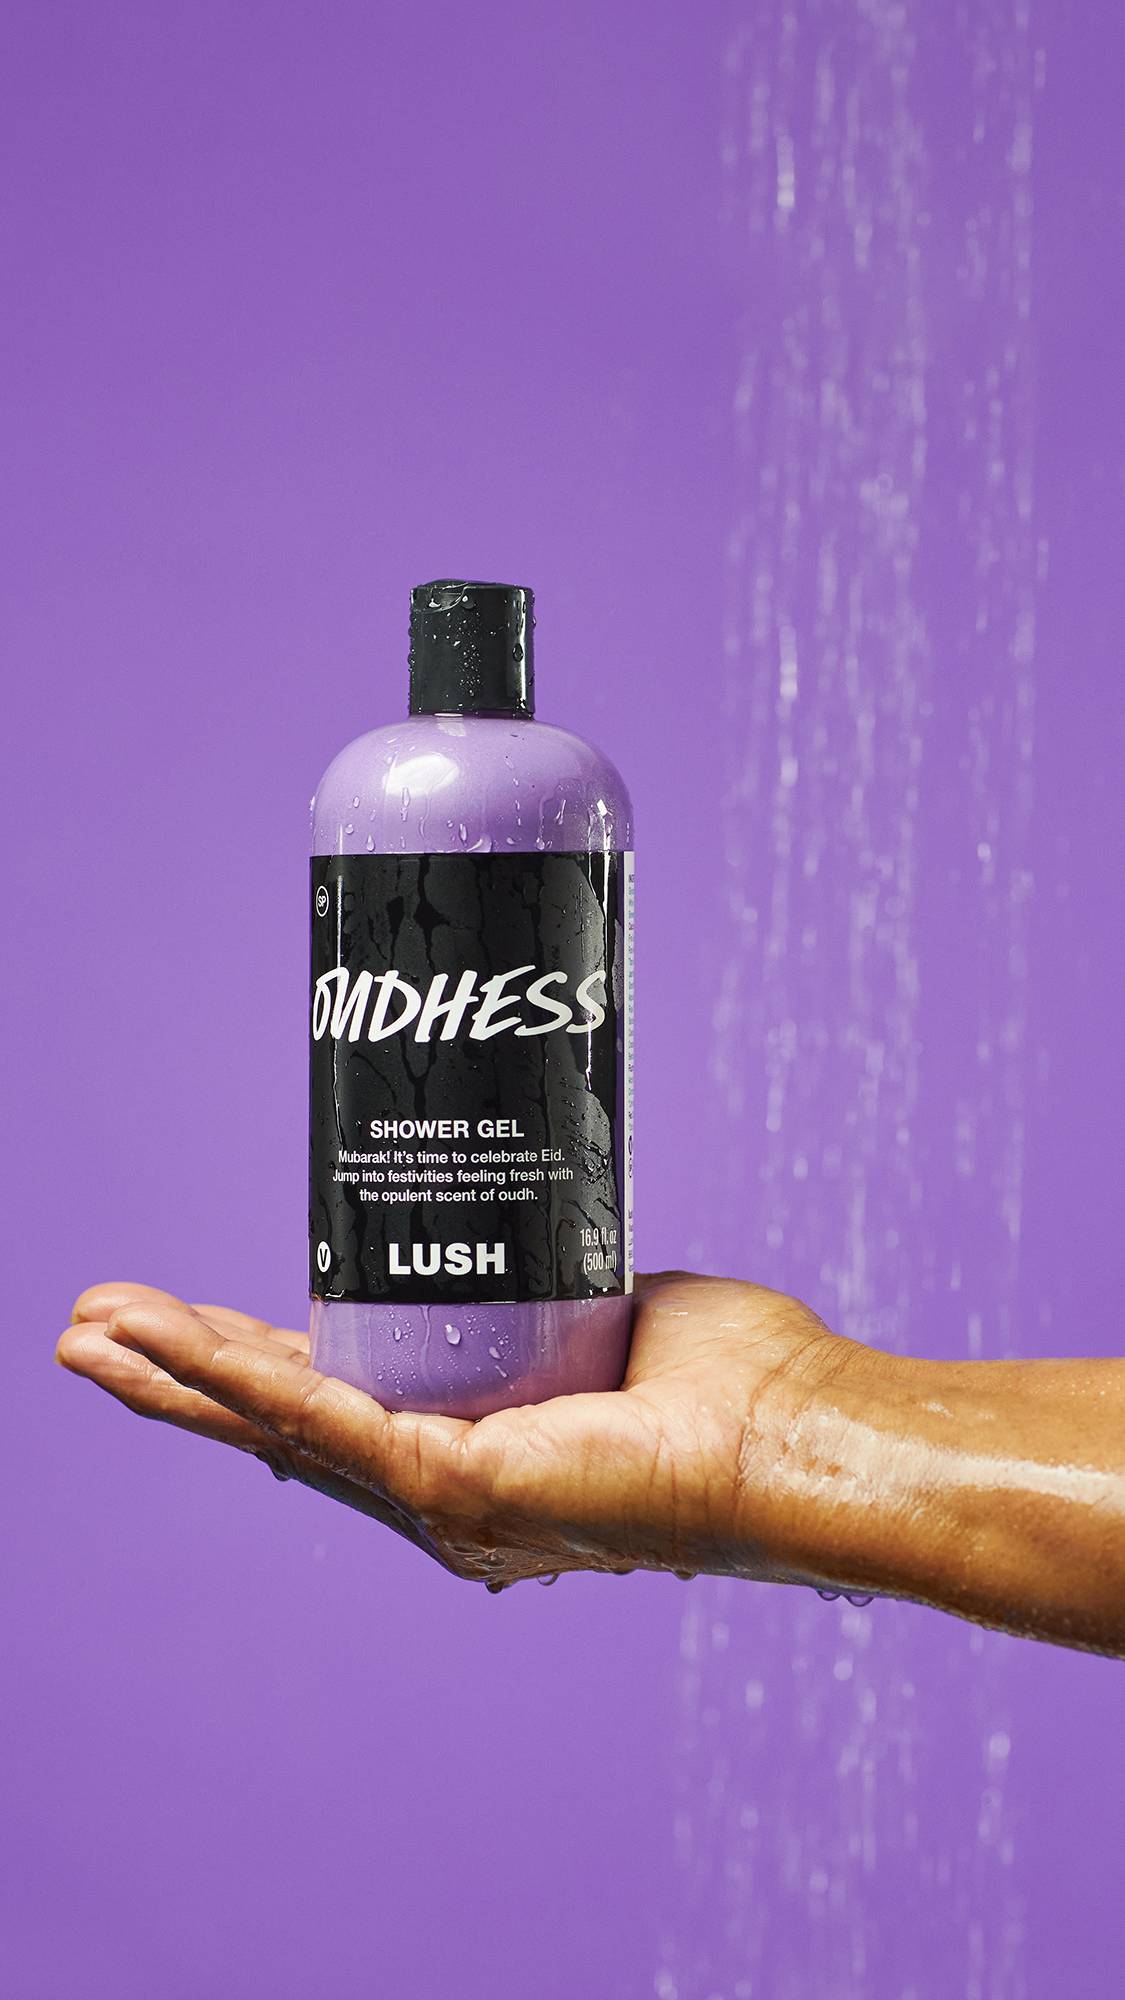 A close-up of the model's hand under running shower water as they hold an upright bottle of the Oudhess shower gel in their flat palm on a lilac background.